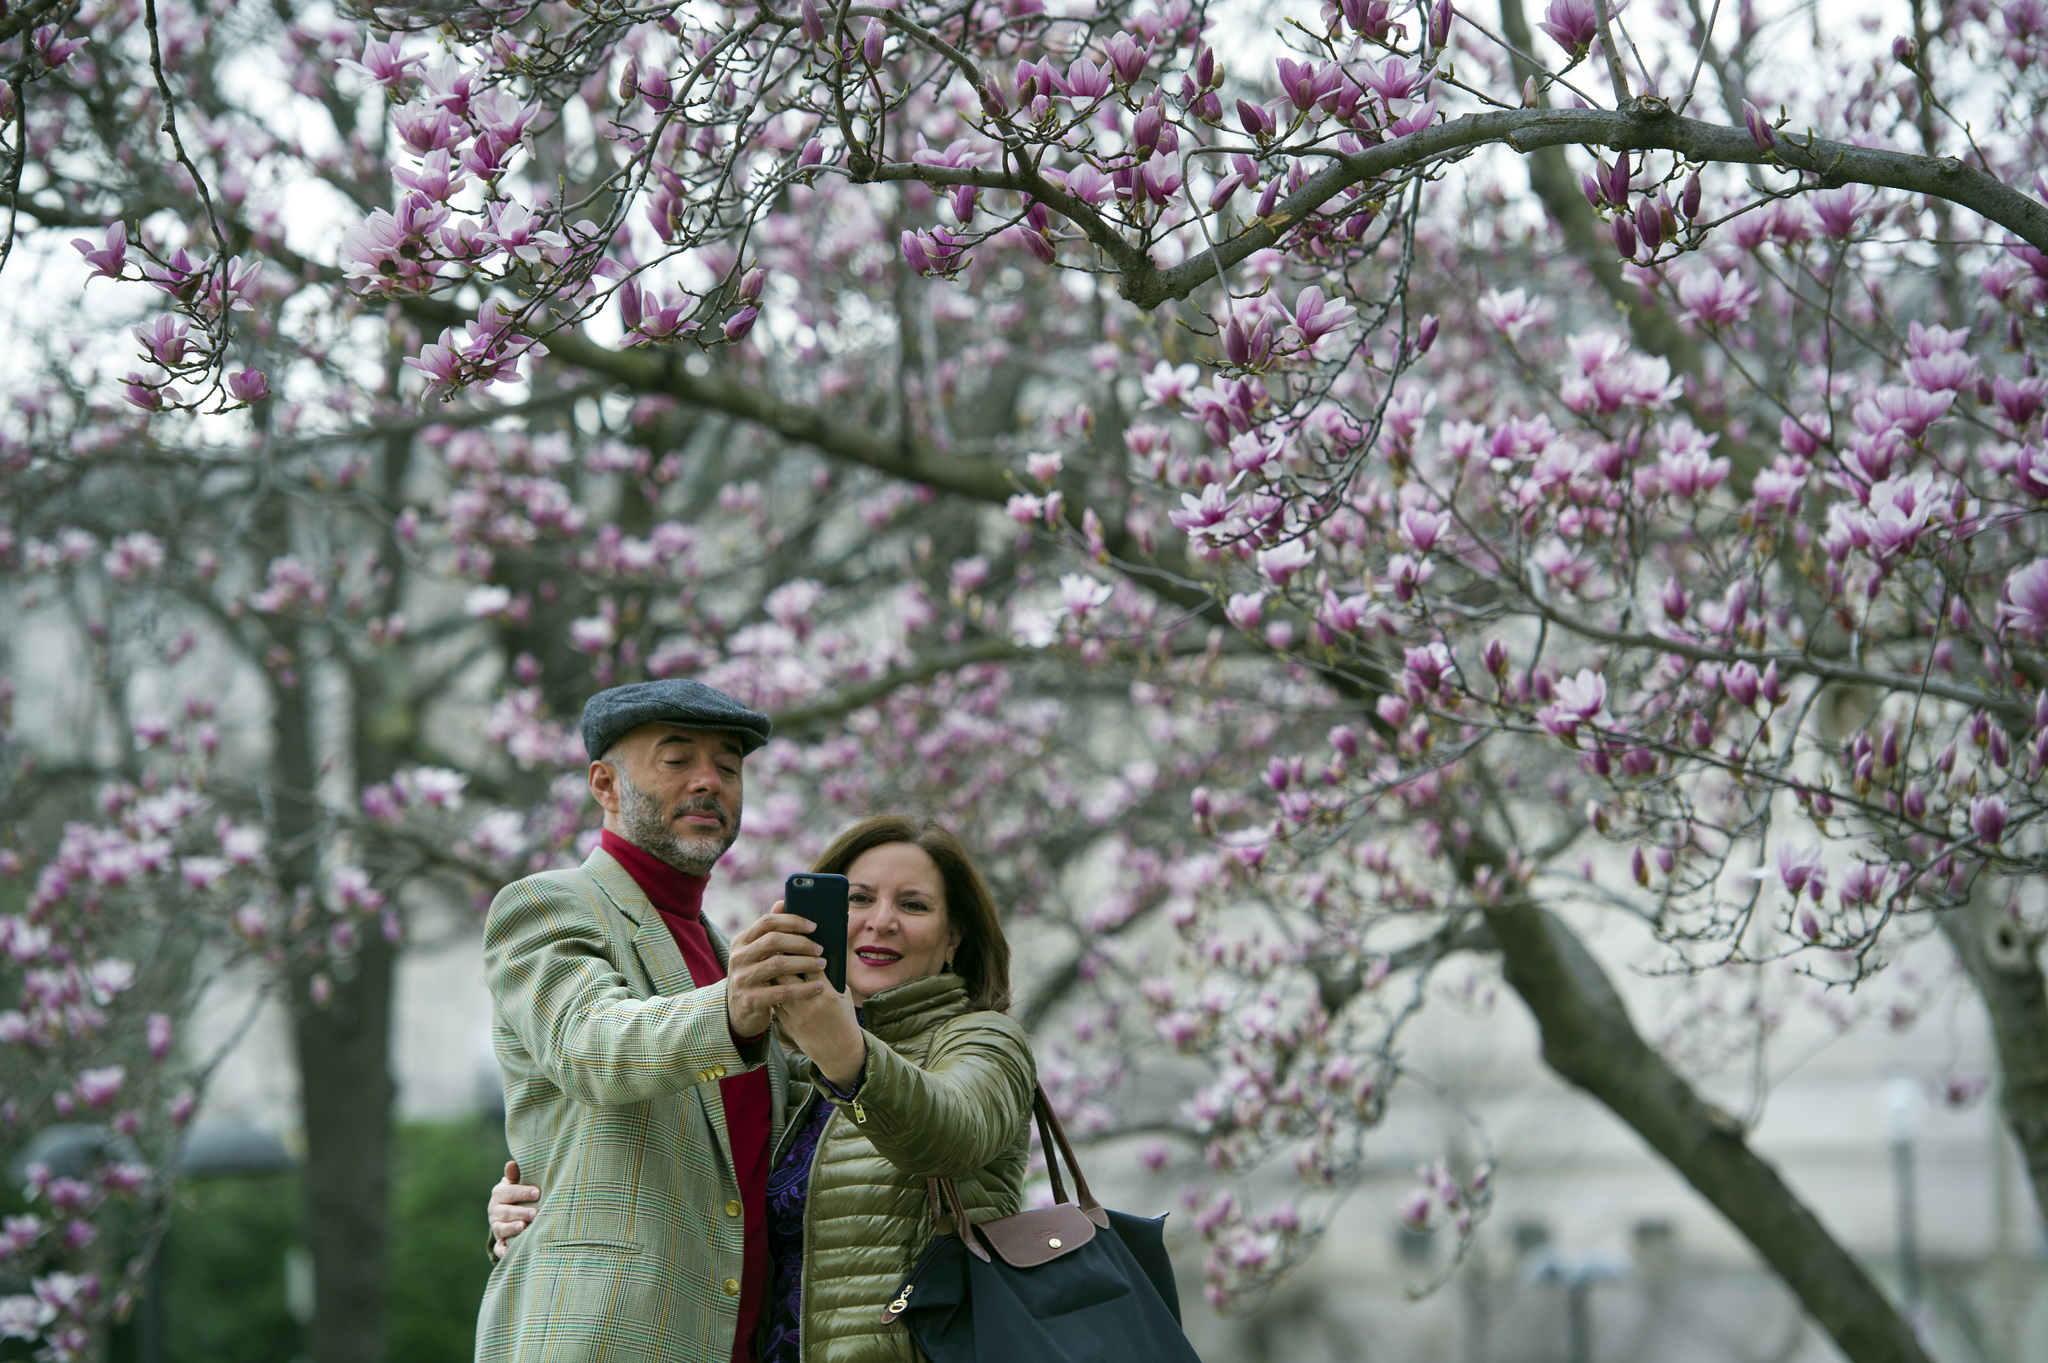 Fidelio Desbradel and his wife Leonor Desbradel, of the Dominican Republic, take a selfie in front of a Tulip Magnolia tree in Washington, D.C. on Tuesday. (Cliff Owen | The Associated Press)